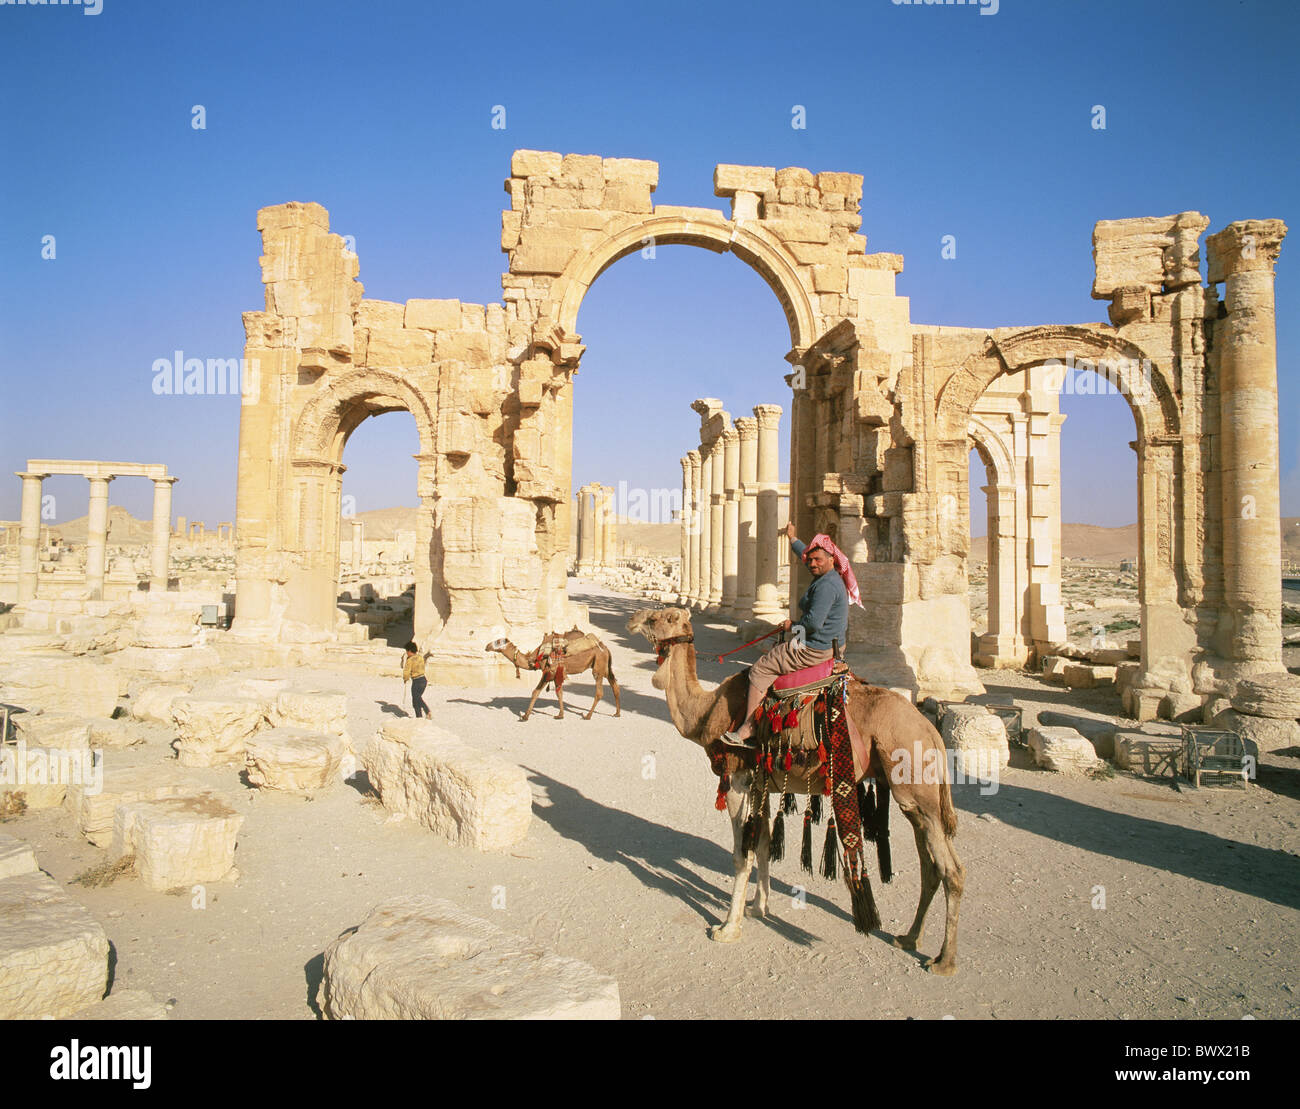 curves local camel rider Palmyra ruins Syria Ancient world antiquity Stock Photo